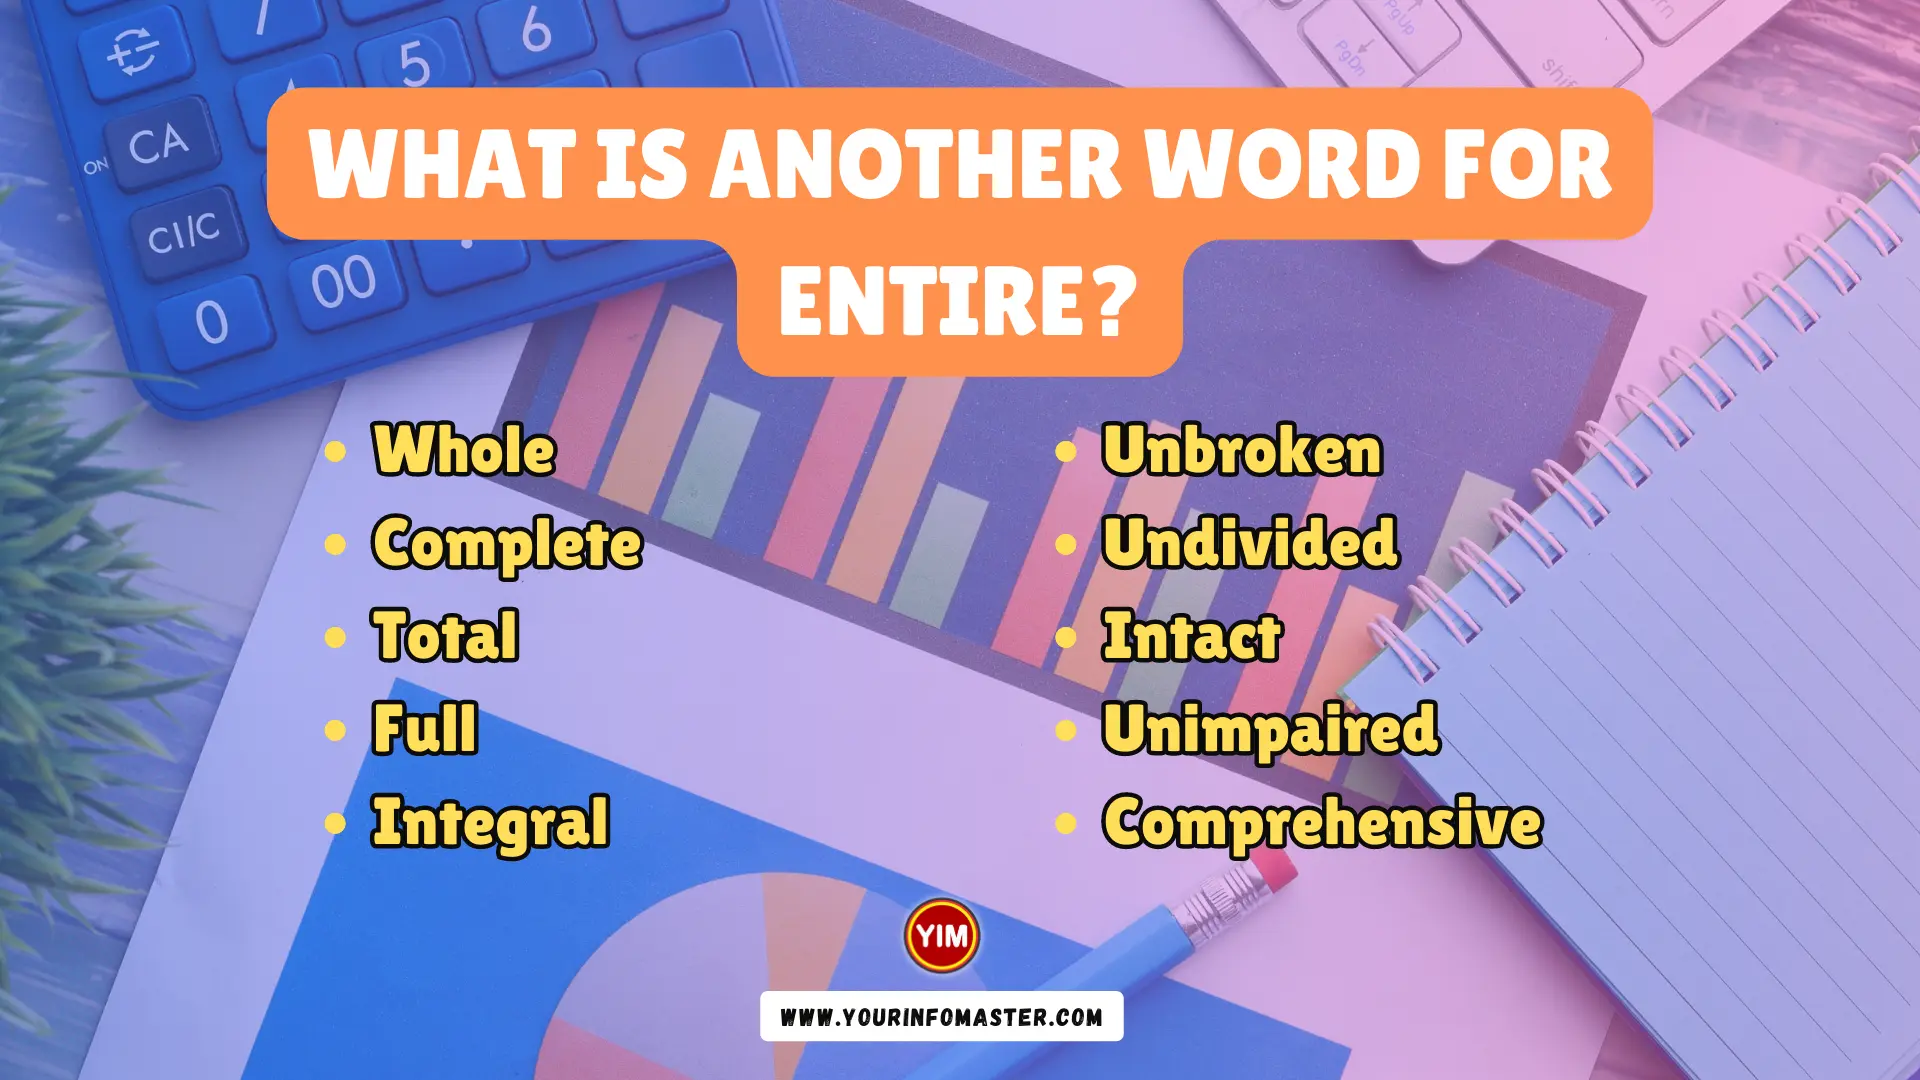 What is another word for Entire